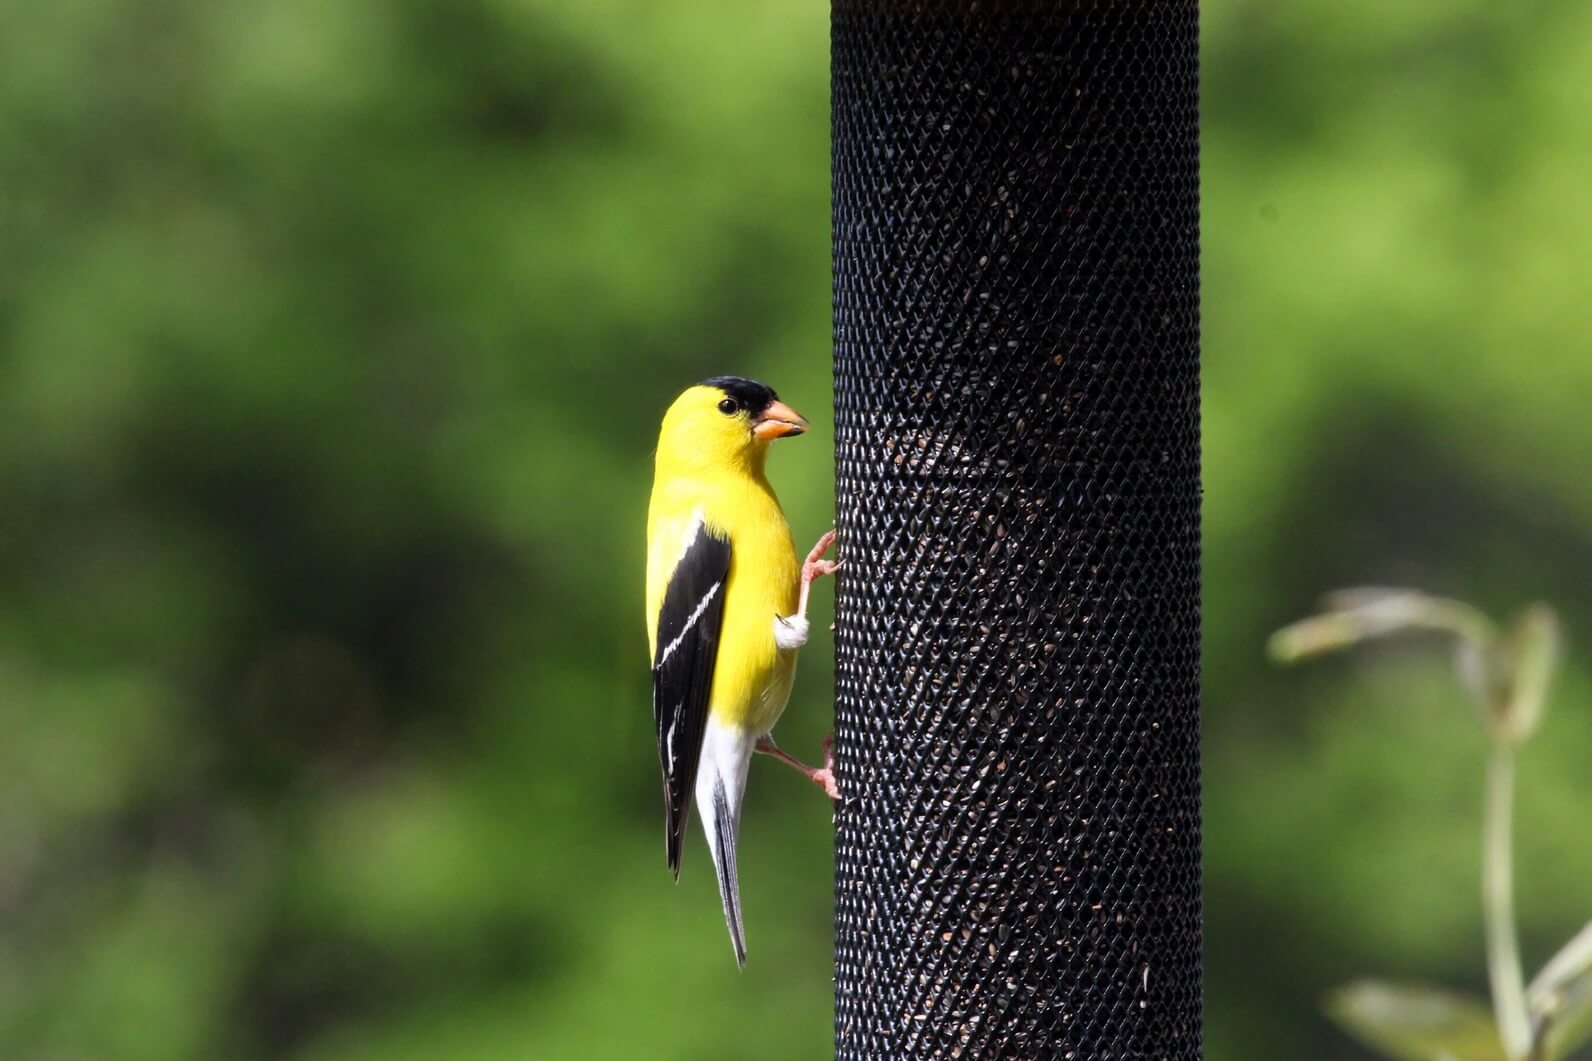 A cheery American Goldfinch eats from a mesh feeder designed to hold the tiny, oil-rich Nyjer seeds that the birds love. Photo: agefotostock/Alamy